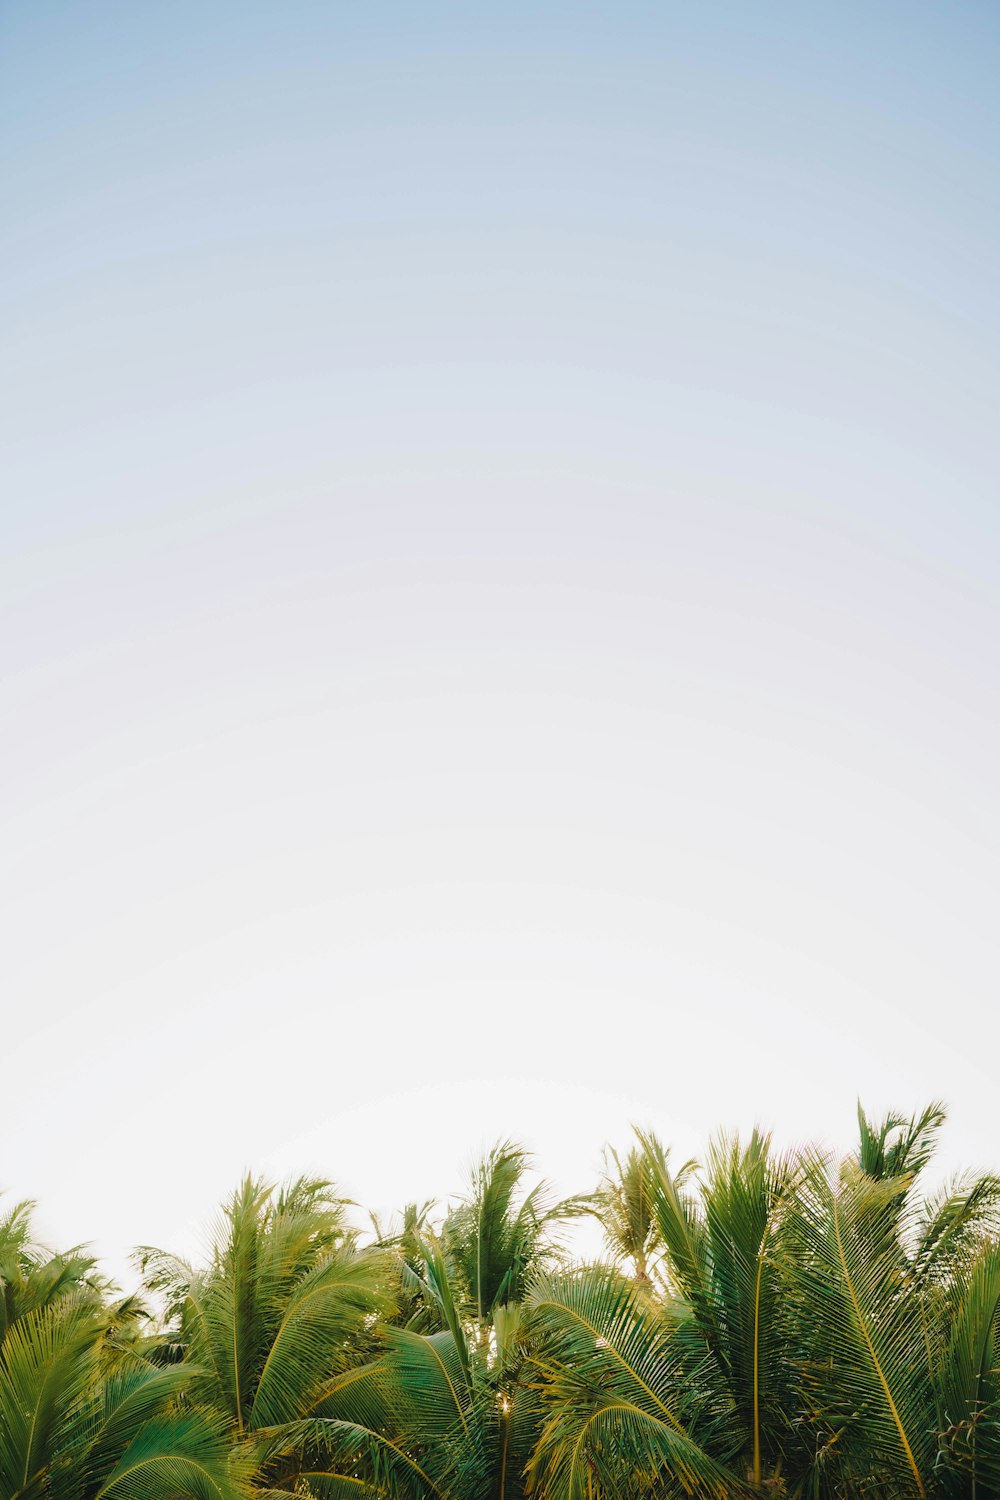 a group of palm trees with a blue sky in the background